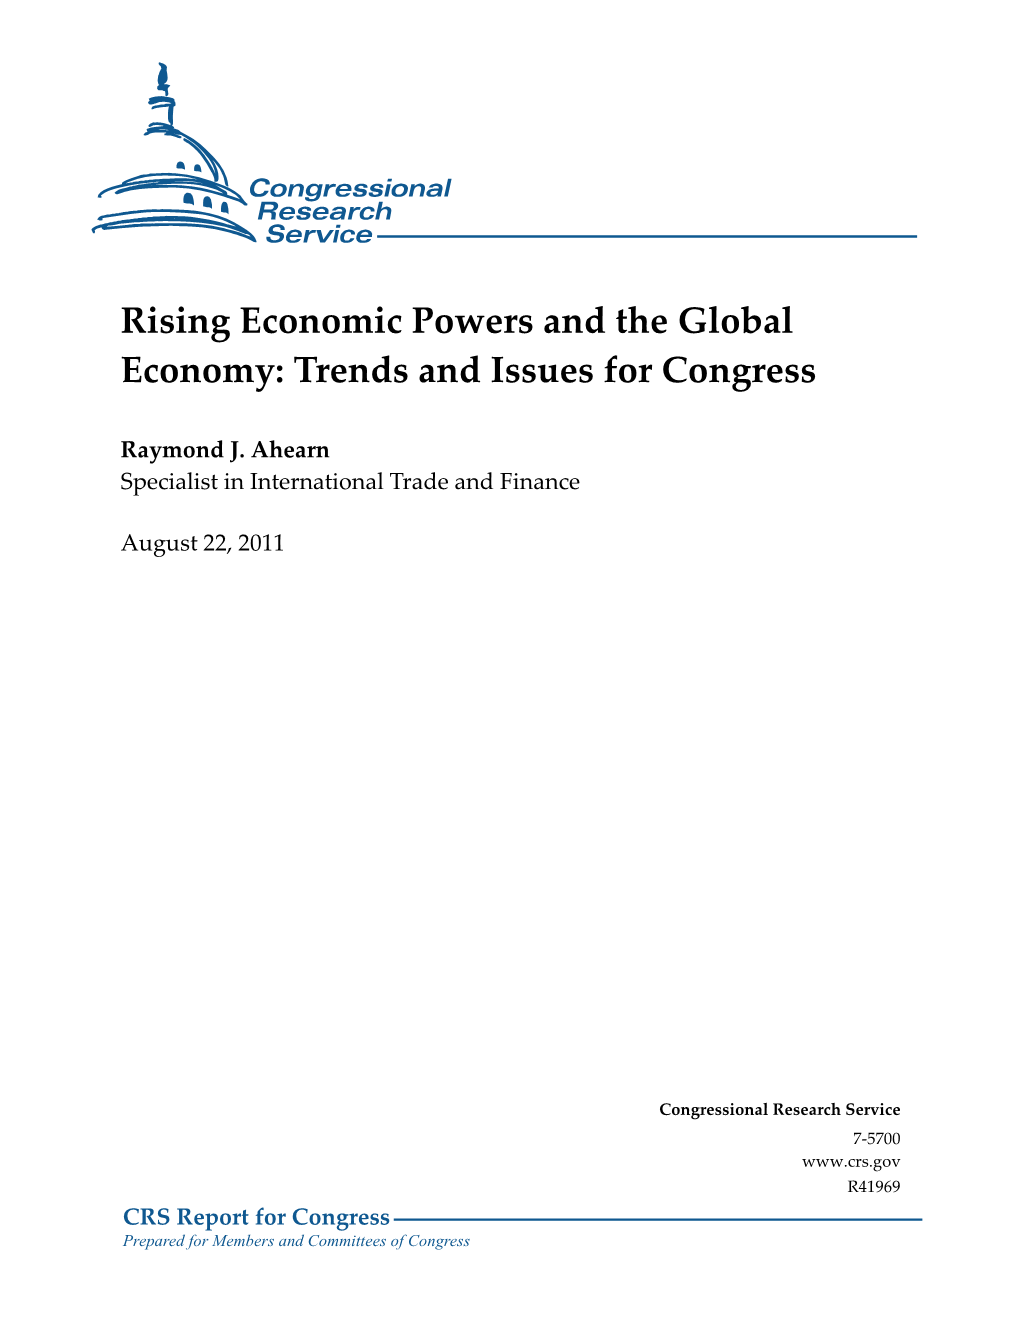 Rising Economic Powers and the Global Economy: Trends and Issues for Congress